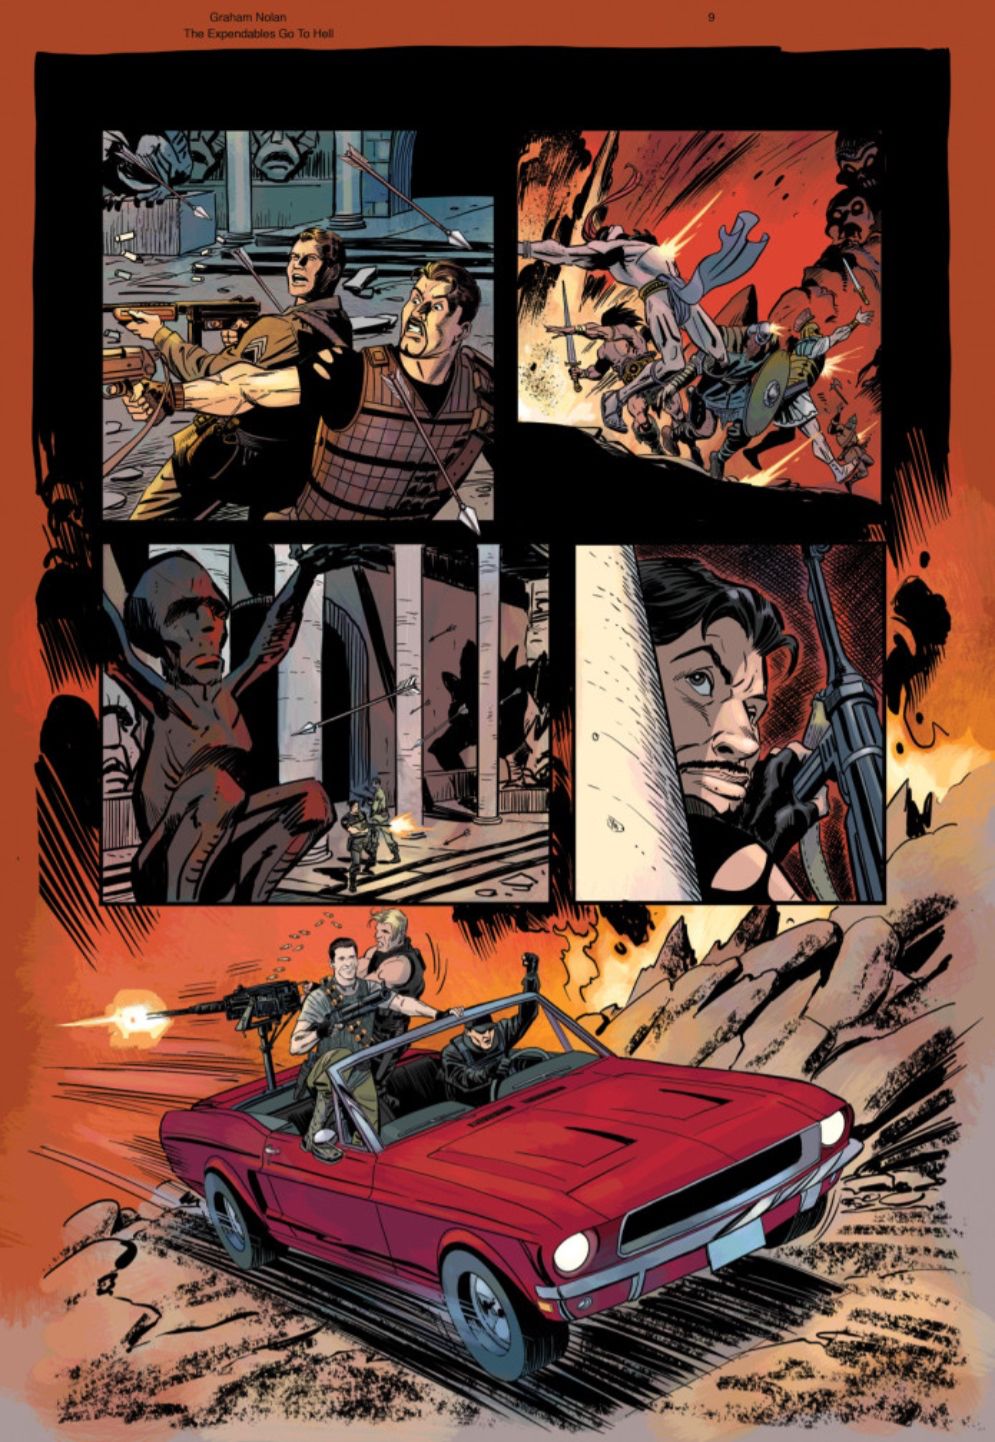 The Expendables Go To Hell Graphic Novel Page 9